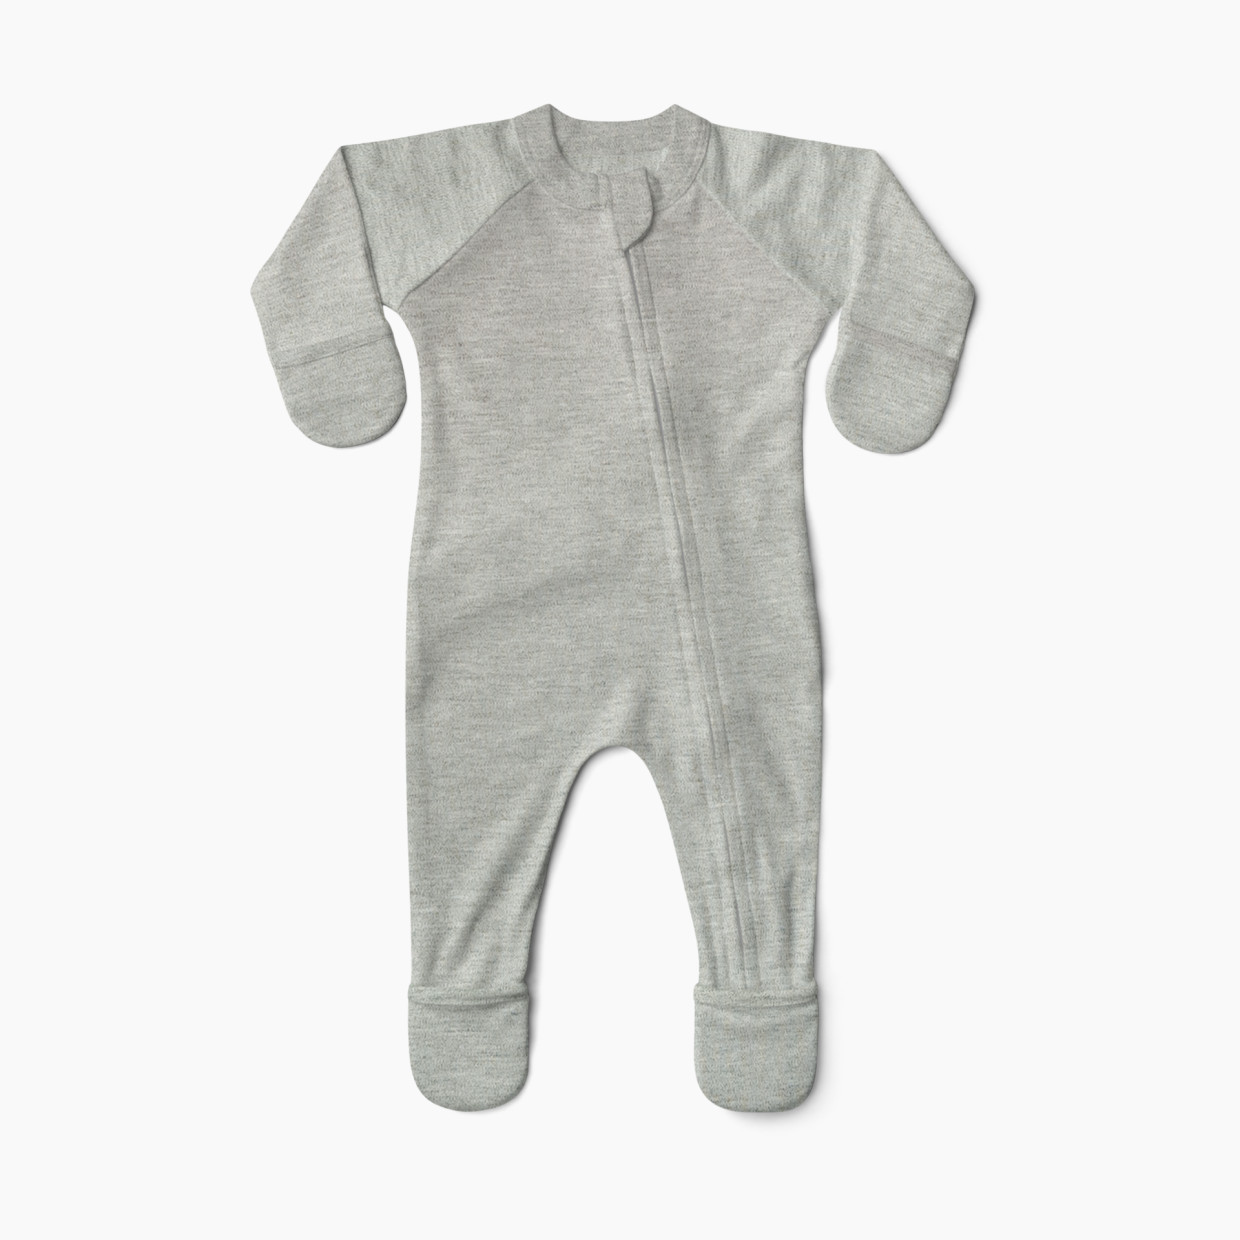 Goumi Kids x Babylist Grow With You Footie - Loose Fit - Pebble, Newborn.